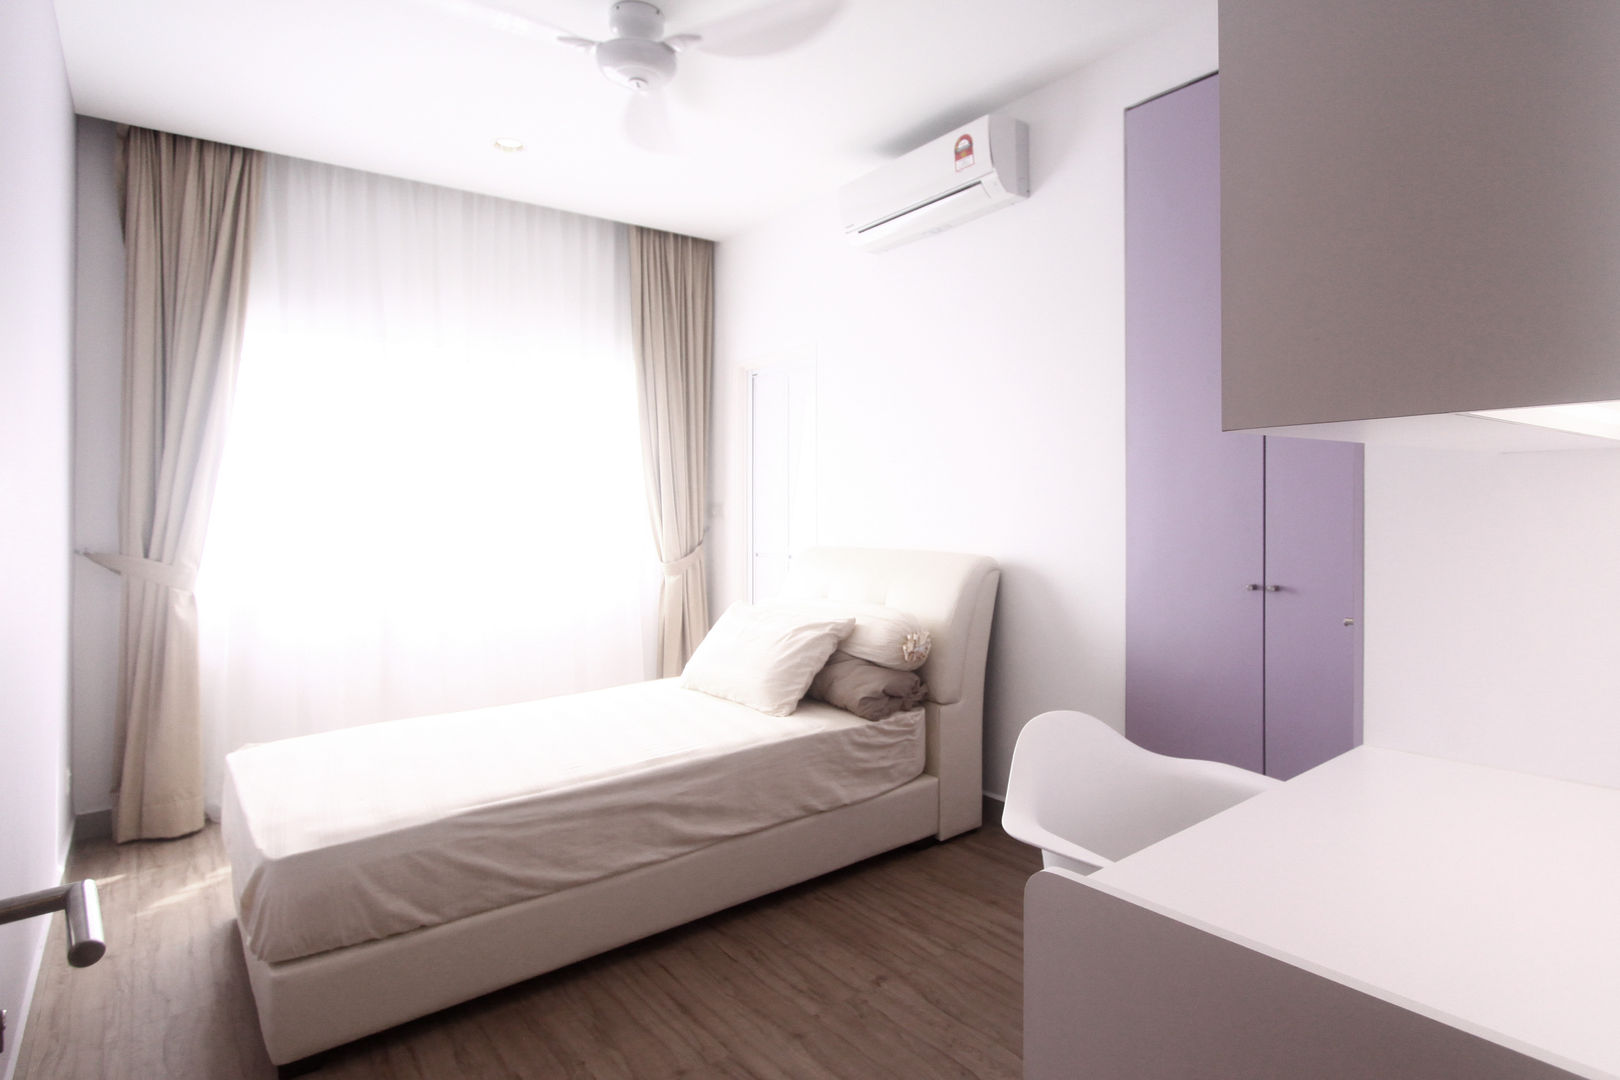 The Sanderson Home, inDfinity Design (M) SDN BHD inDfinity Design (M) SDN BHD Kamar Tidur Modern